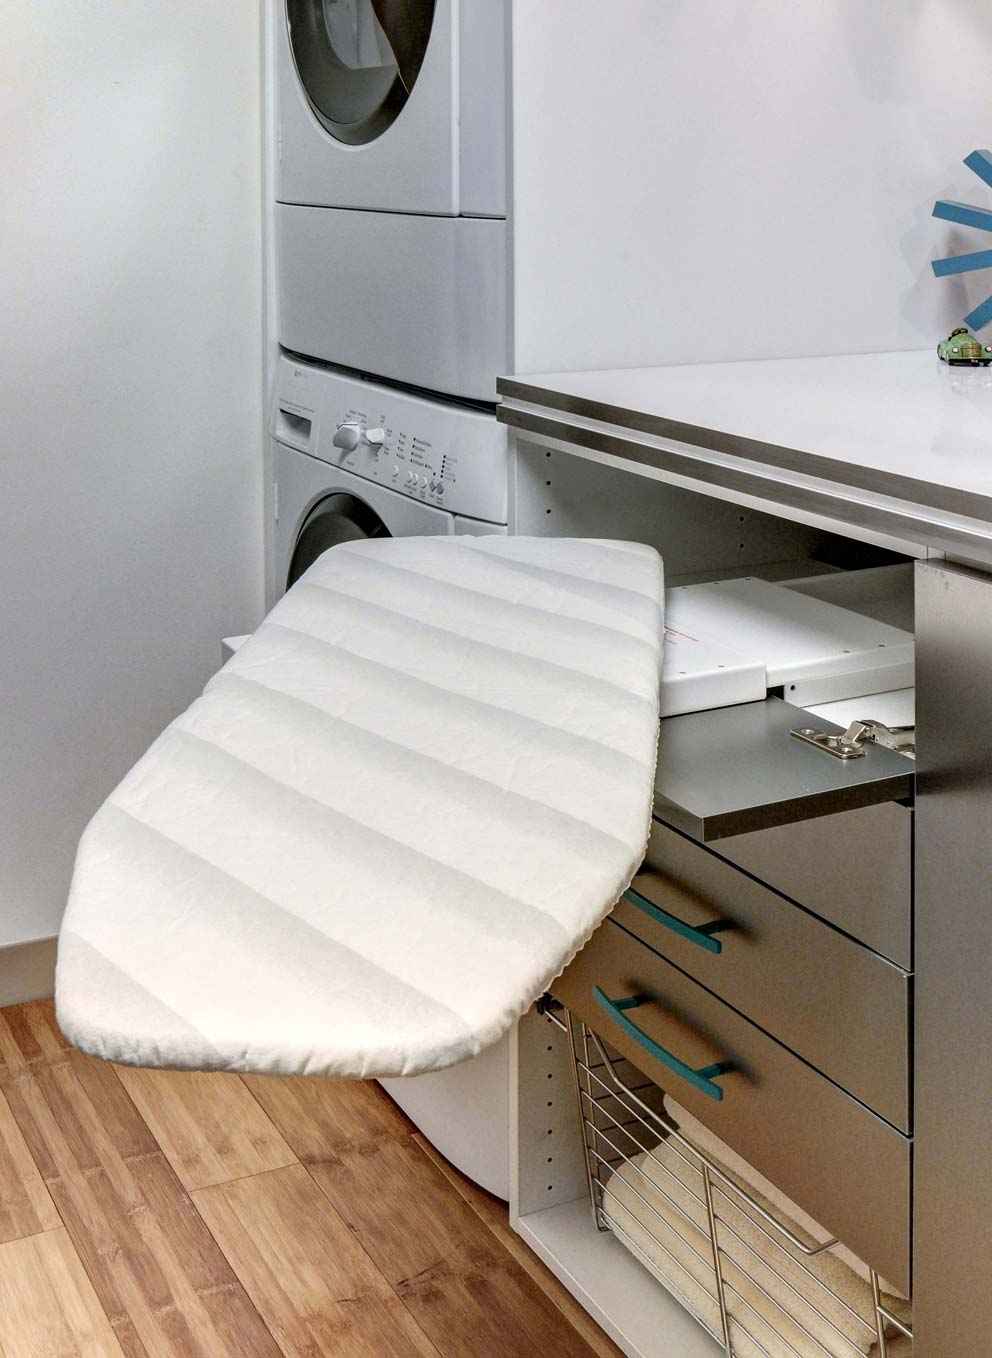 laundry closet with a ironing board